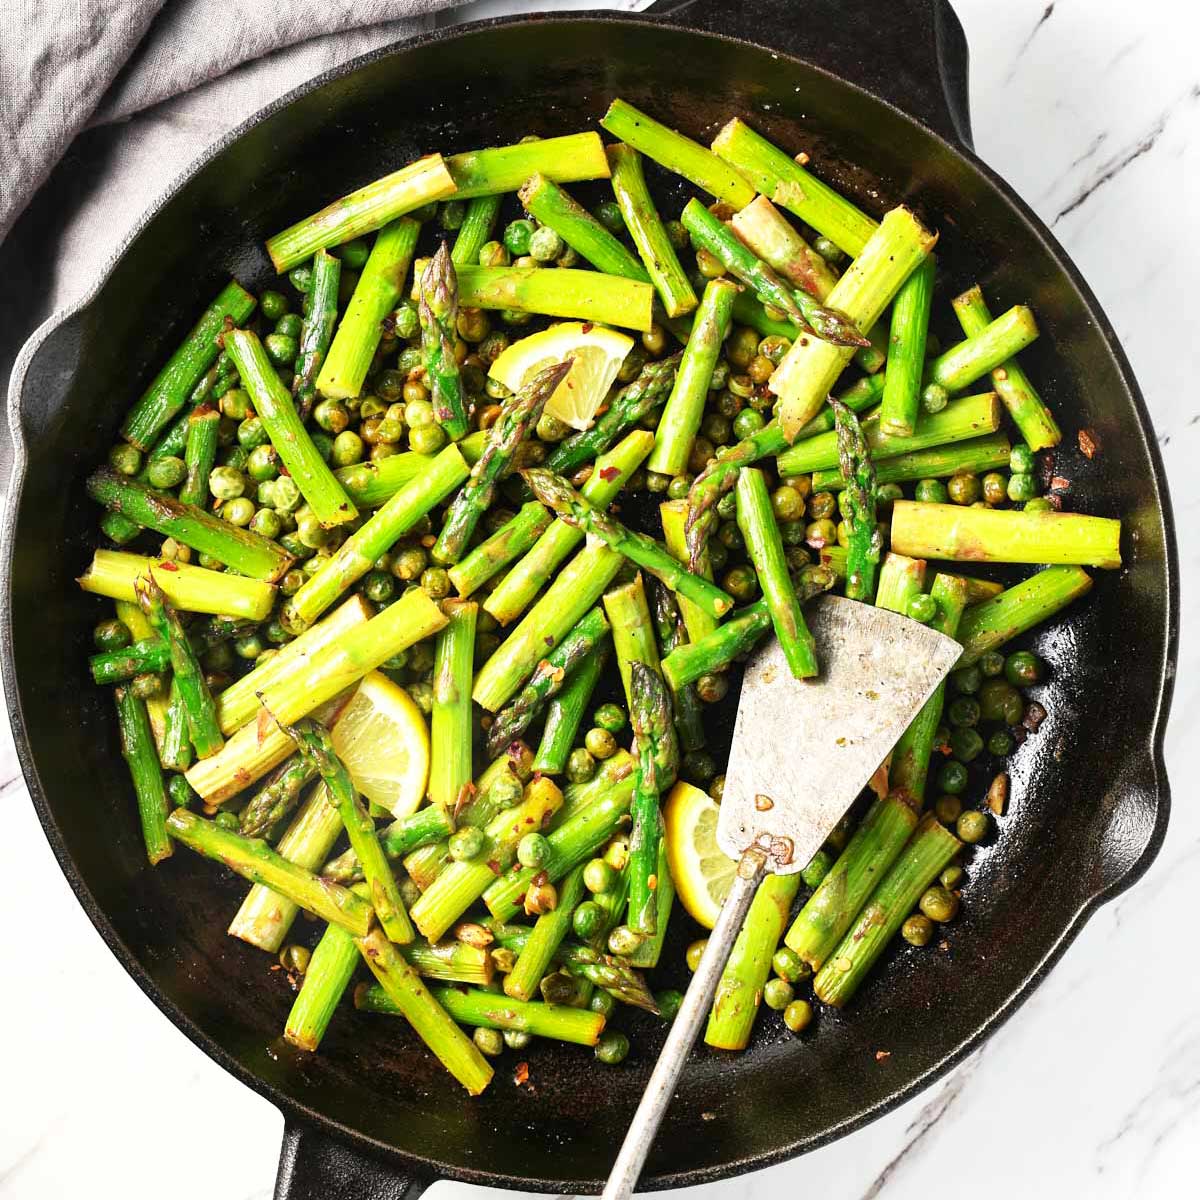 Roasted asparagus and peas in a cast iron pan with a metal spatula.